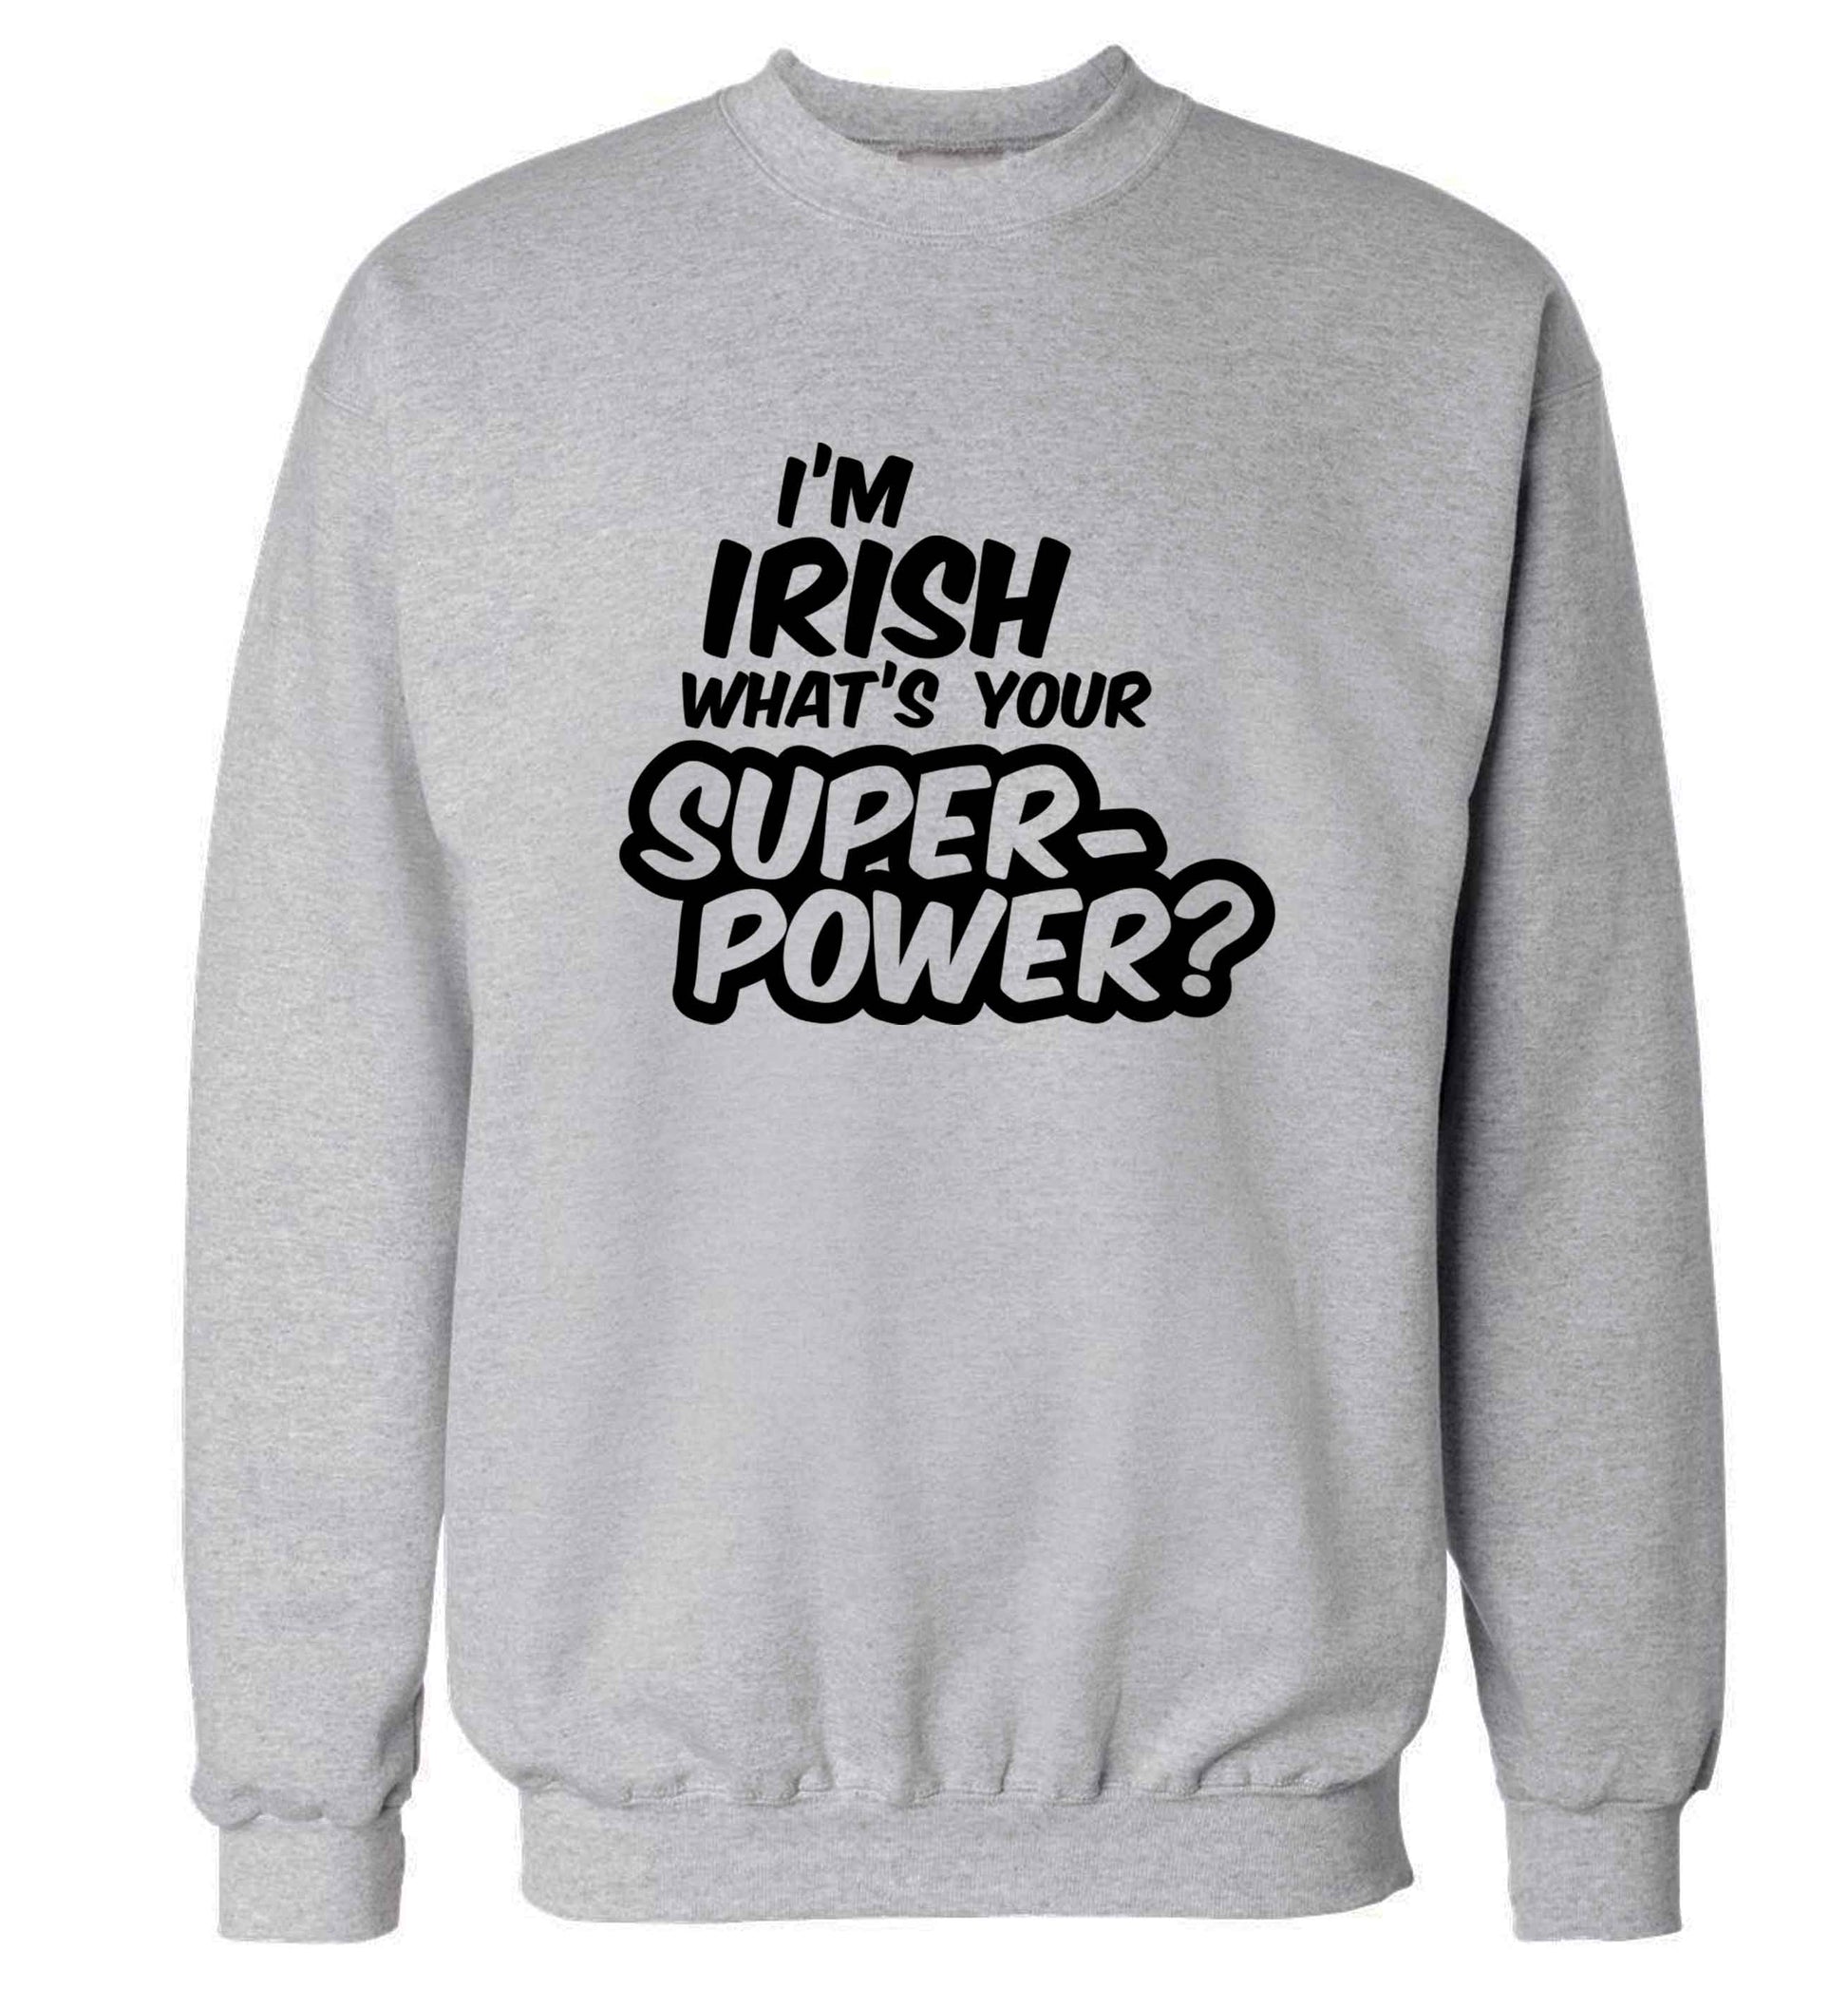 I'm Irish what's your superpower? adult's unisex grey sweater 2XL